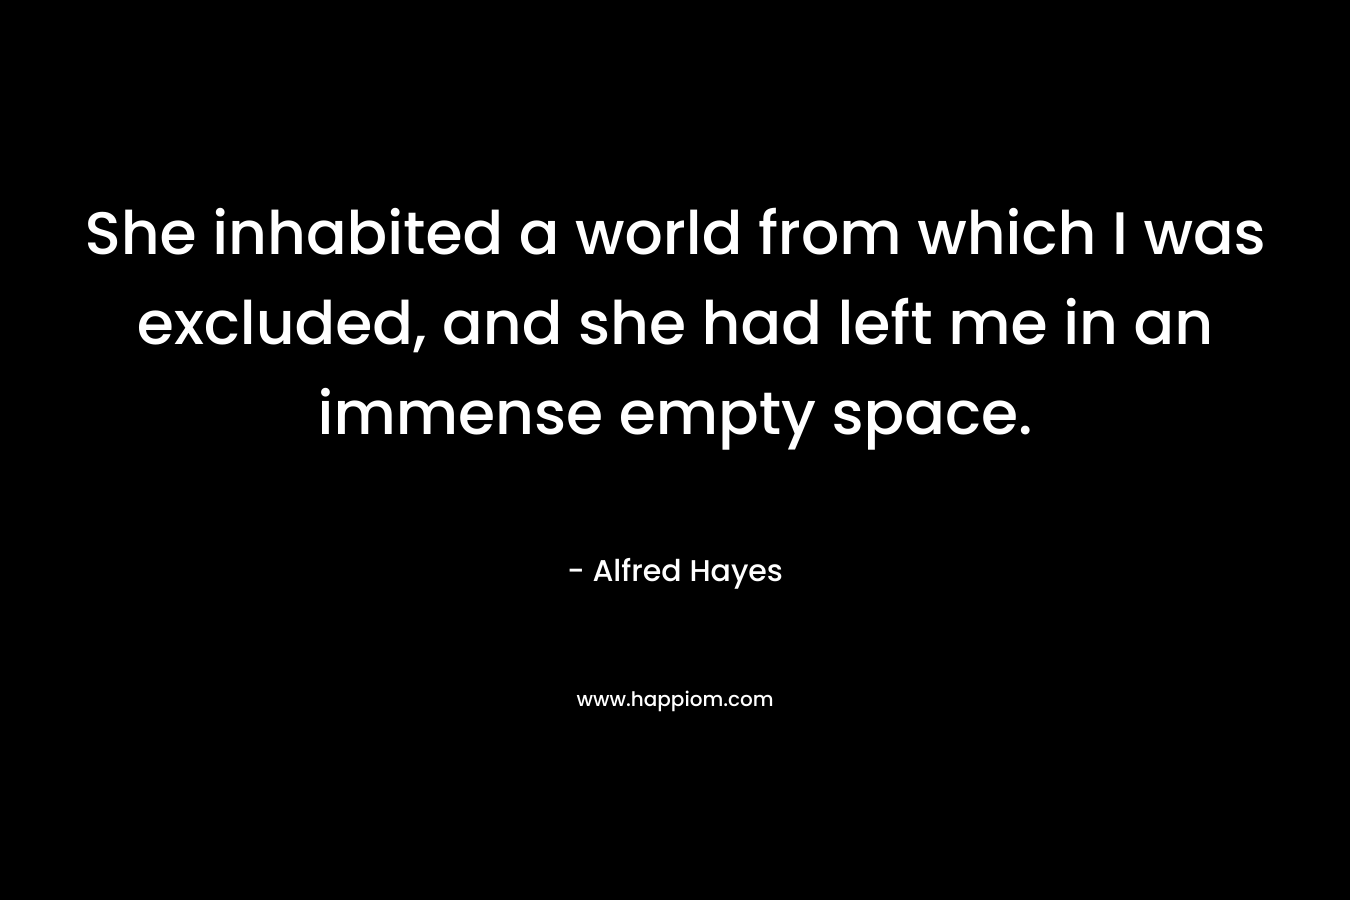 She inhabited a world from which I was excluded, and she had left me in an immense empty space.